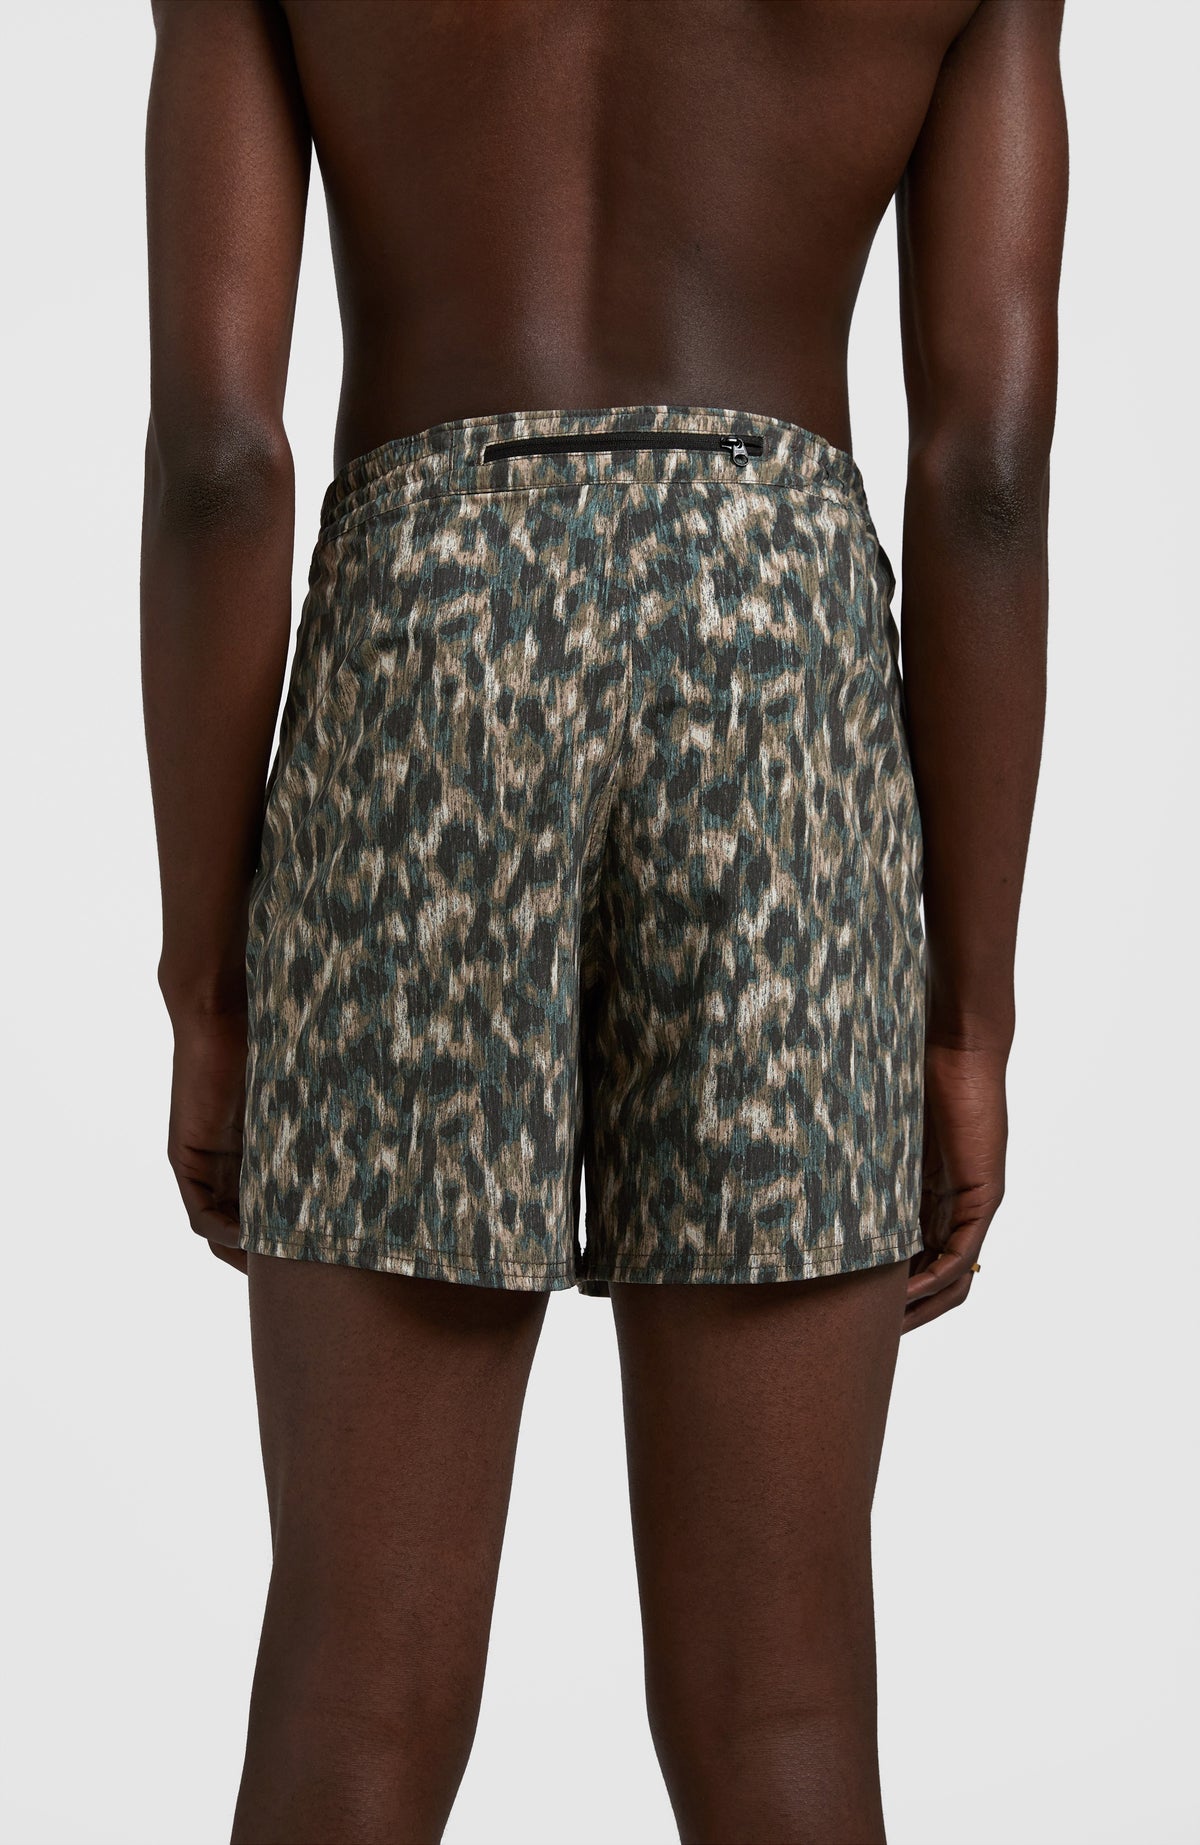 O'Neill Packable All Over Print 15'' Hybrid Shorts - Men's outdoor shorts